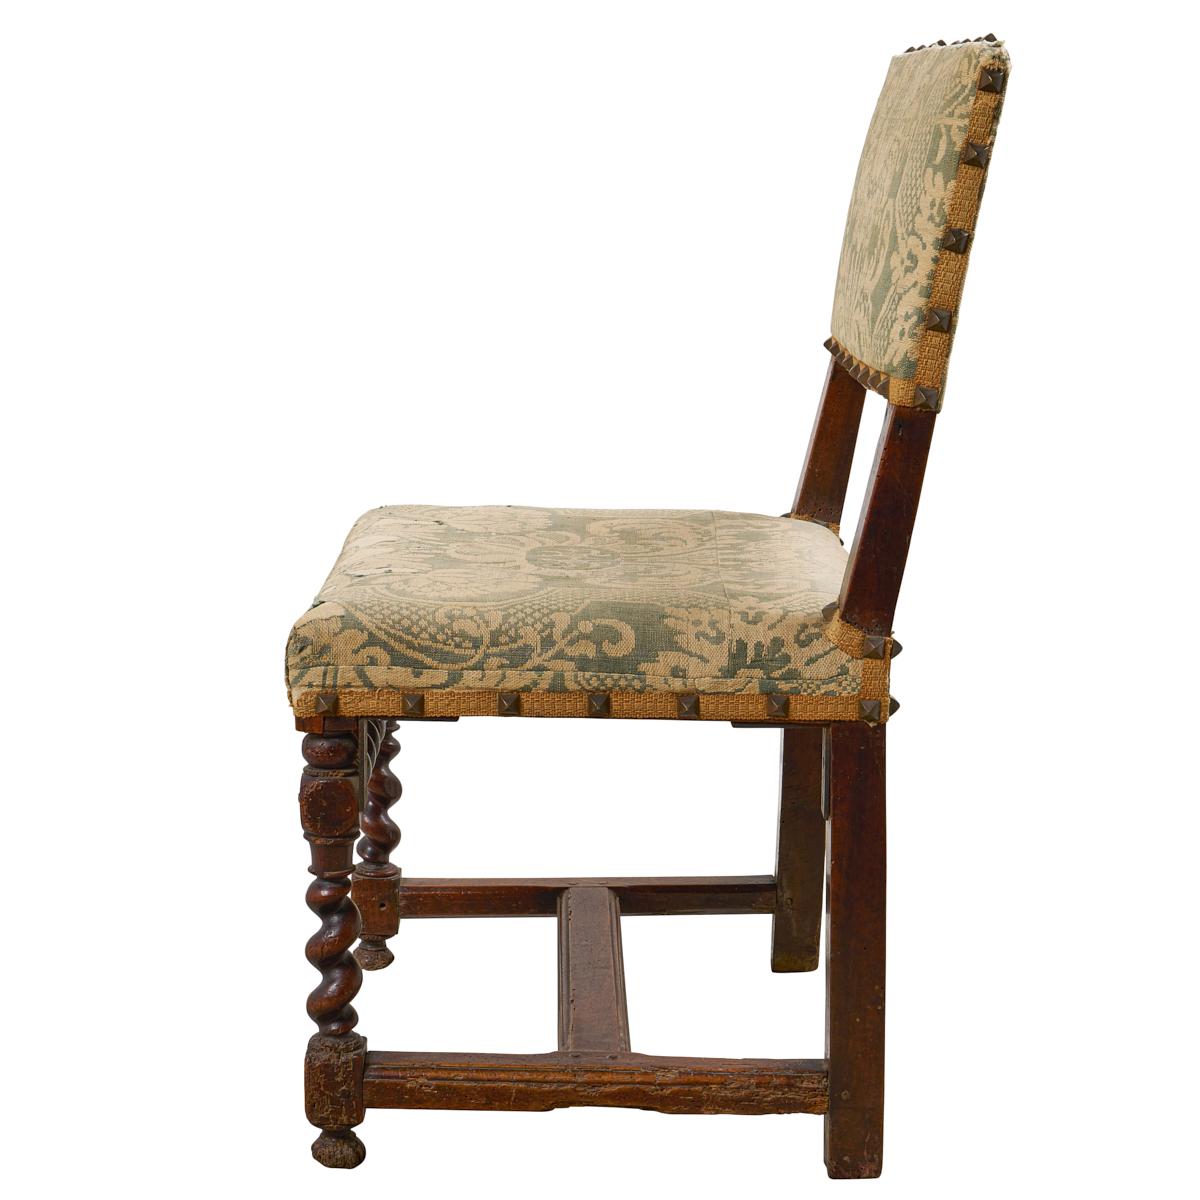 Discovered in France, these 18th-century hall chairs are notable for their wonderful carved frames, elegant damask upholstery and pyramid-shaped nailhead trim. This go-anywhere pair is useful, versatile and elegant.